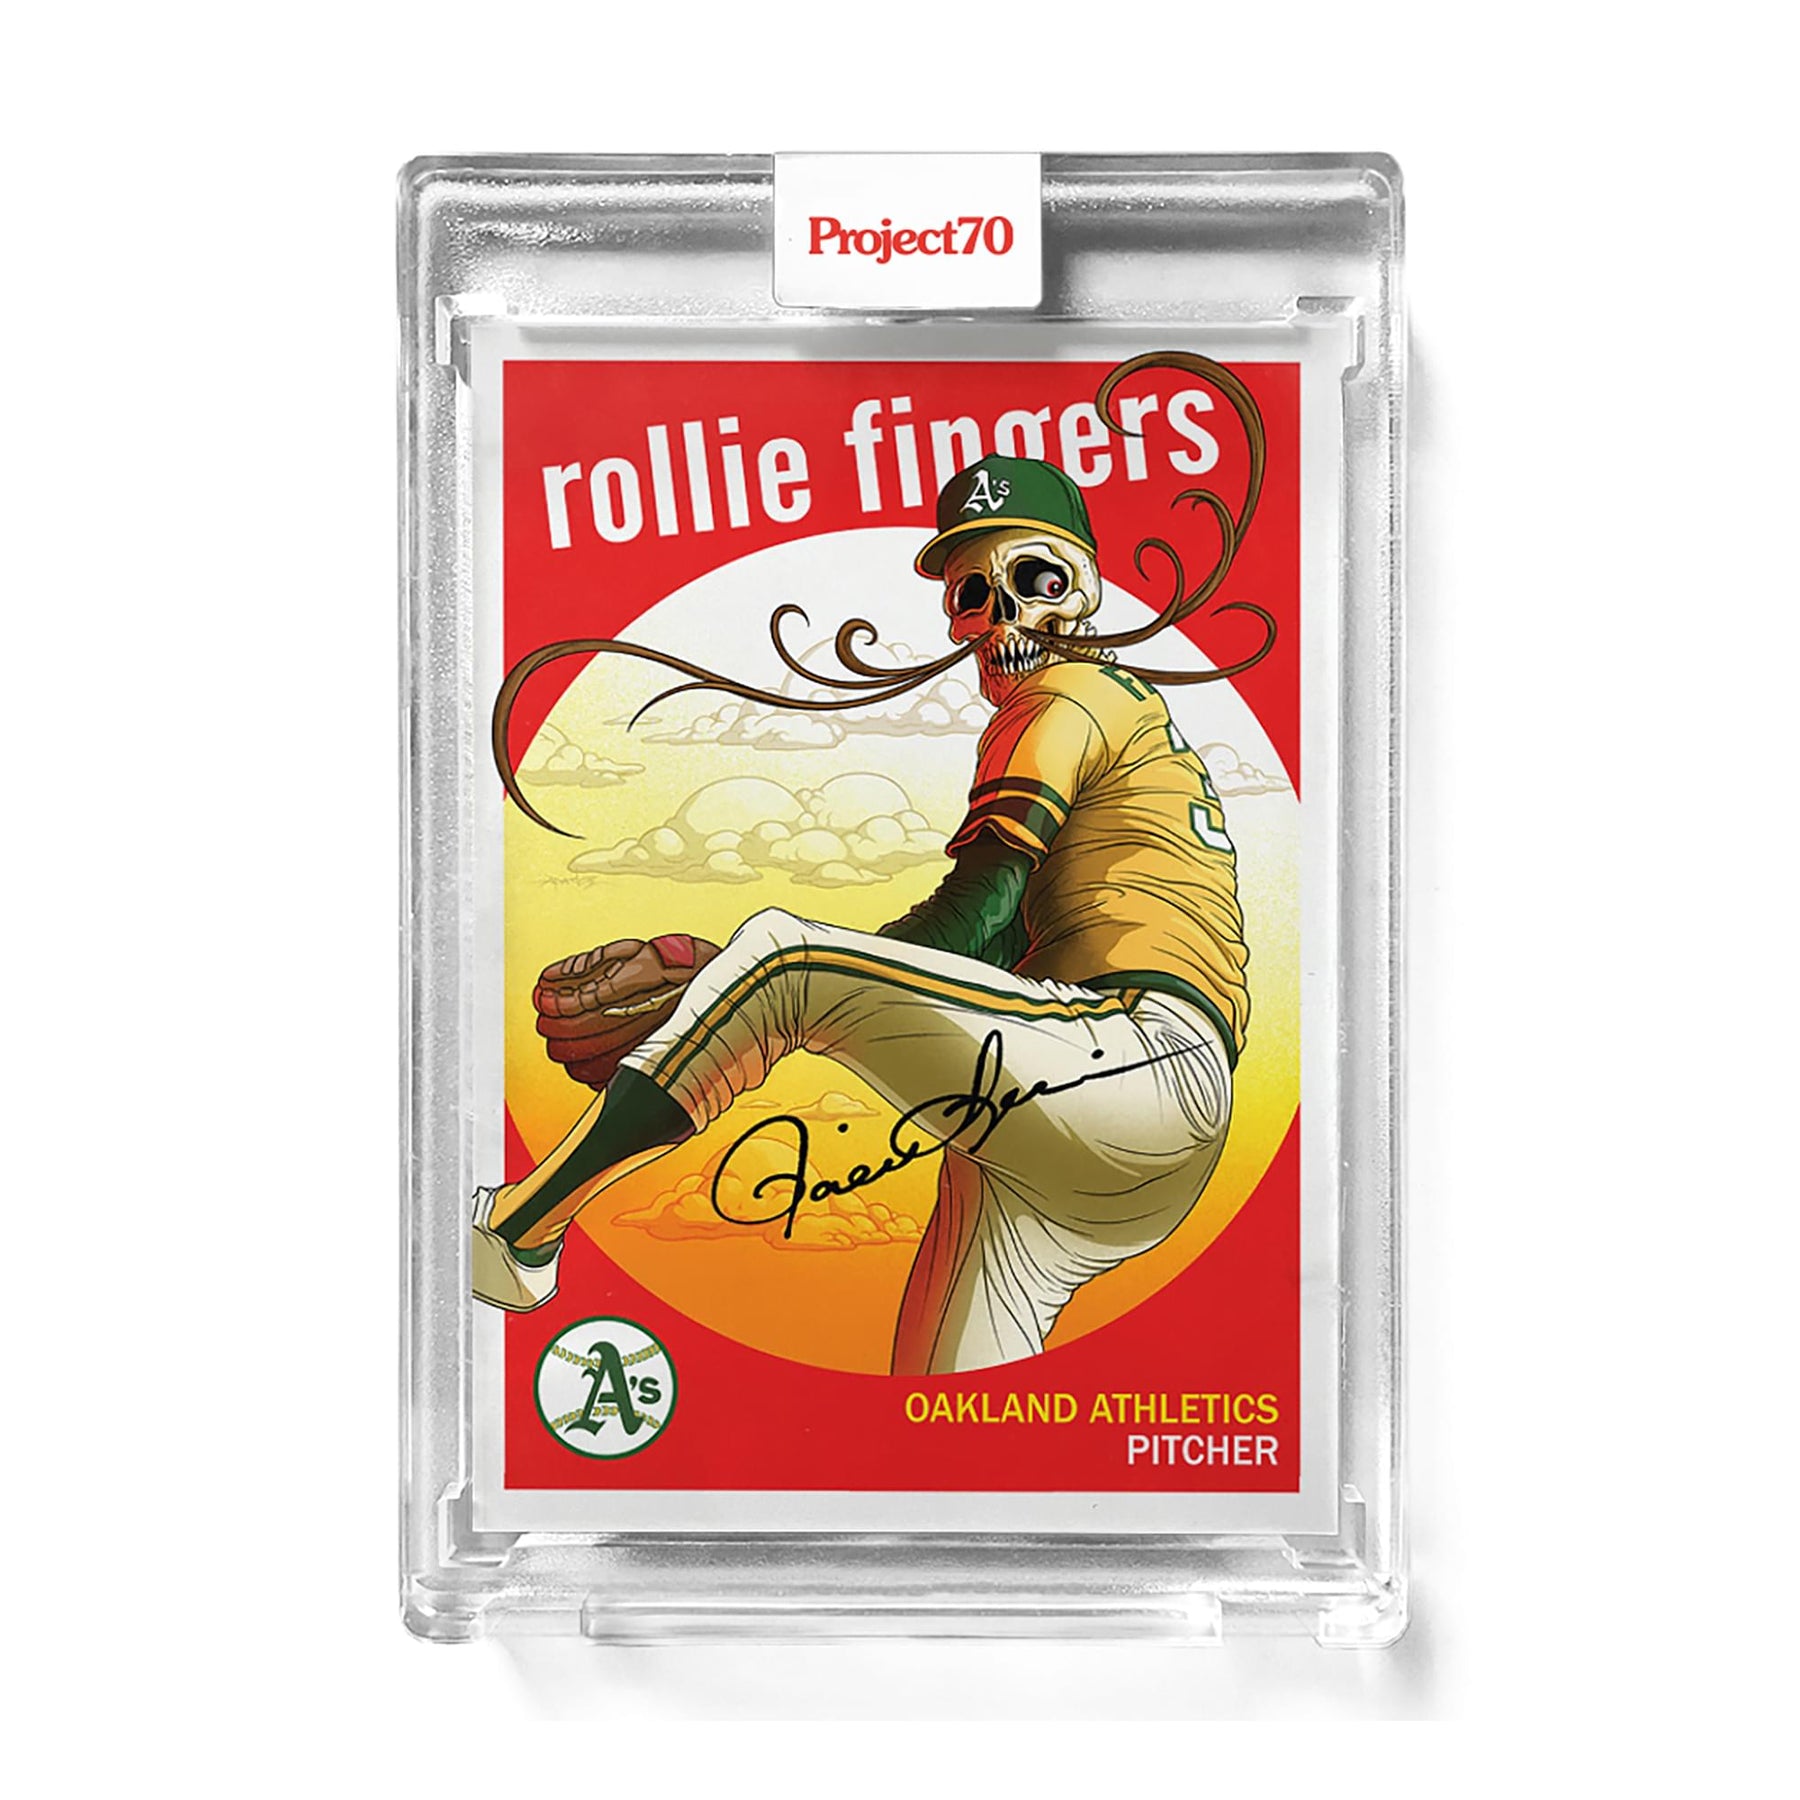 MLB Topps Project70 Card 297 | 1959 Rollie Fingers by Alex Pardee